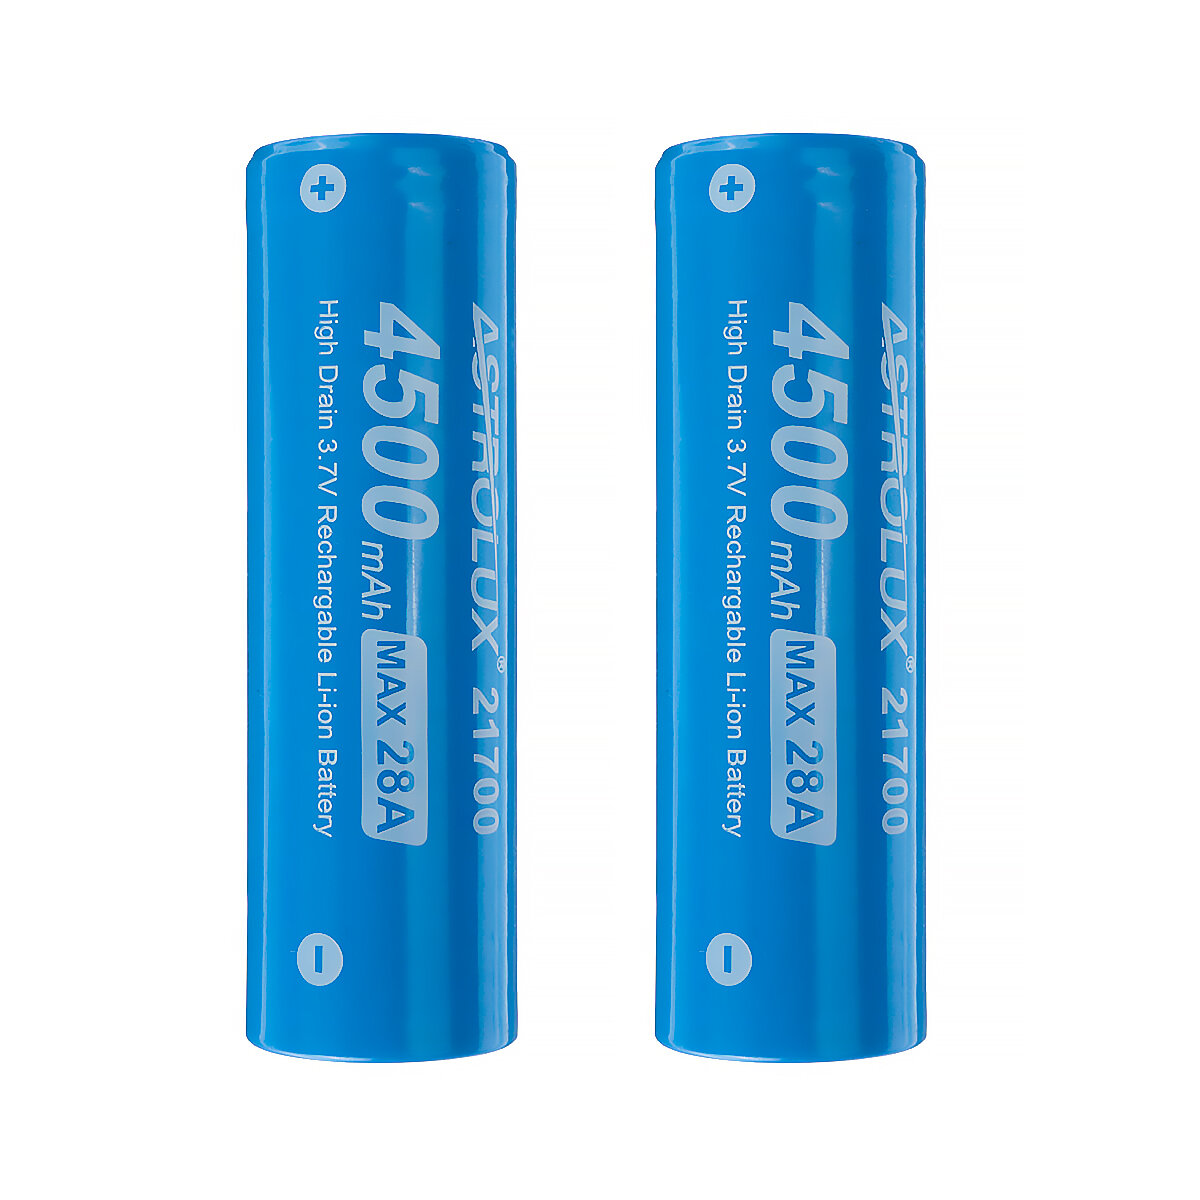 best price,pcs.,astrolux,e2145,4500mah,28a,3.7v,battery,unprotected,discount